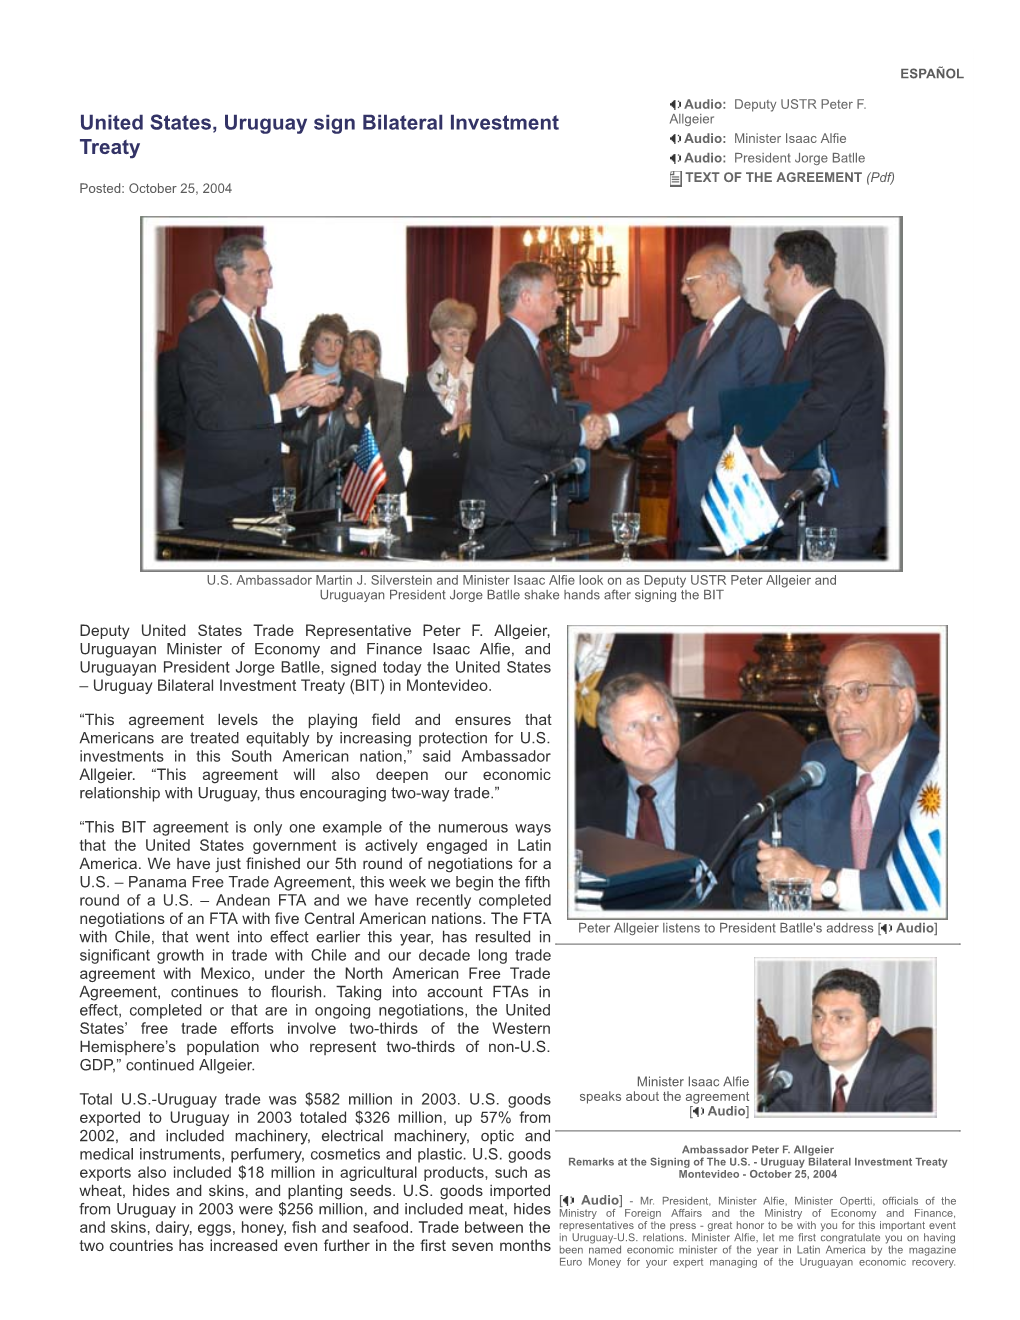 United States, Uruguay Sign Bilateral Investment Treaty